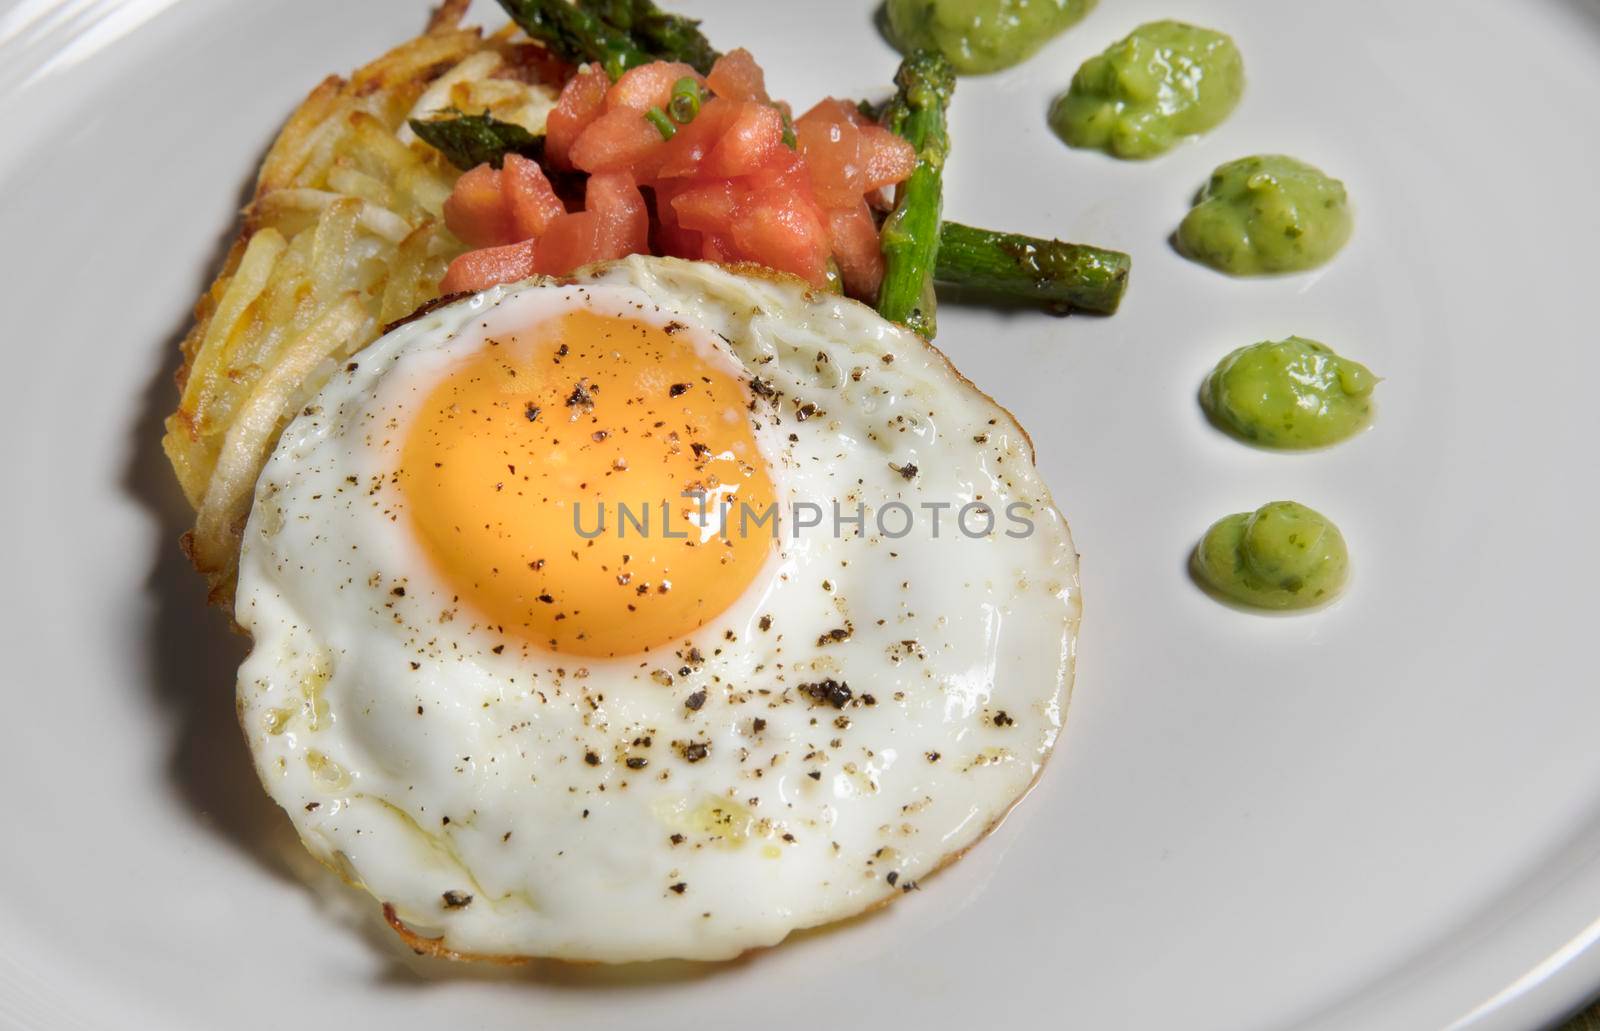 Fried egg with hashbrowns, asparagus, tomatoes and avocado sauce.